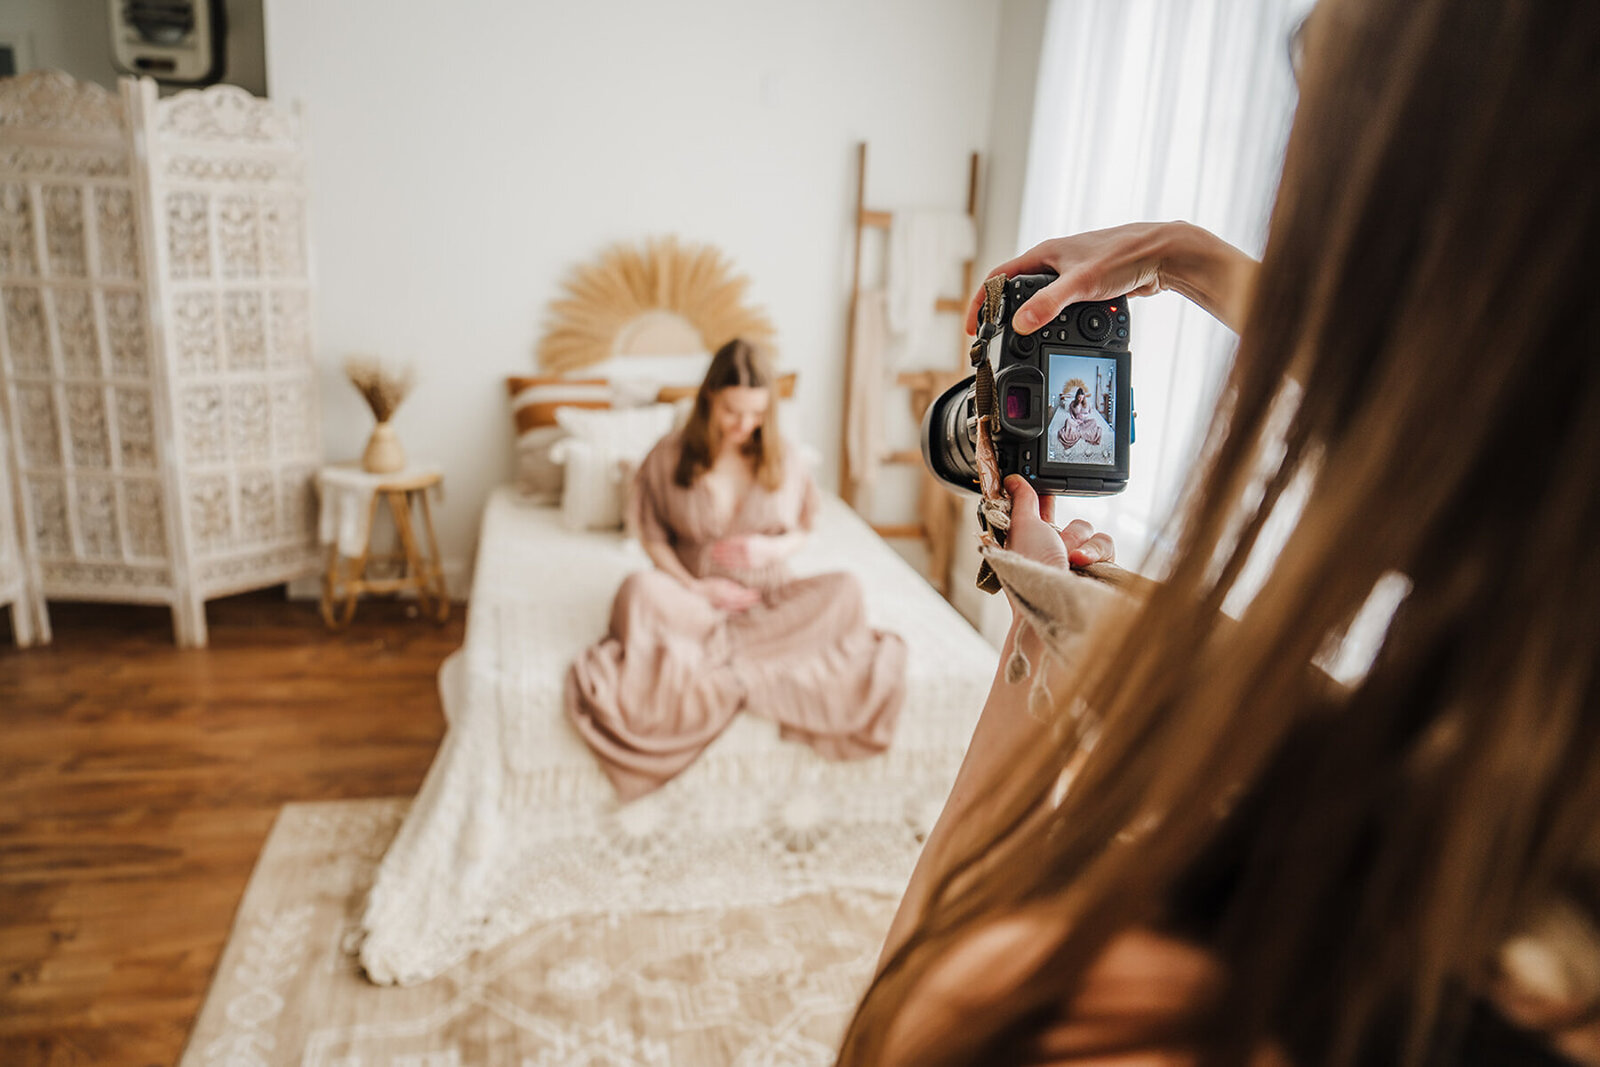 photographer holds up camera to take photo of pregnant woman on bed